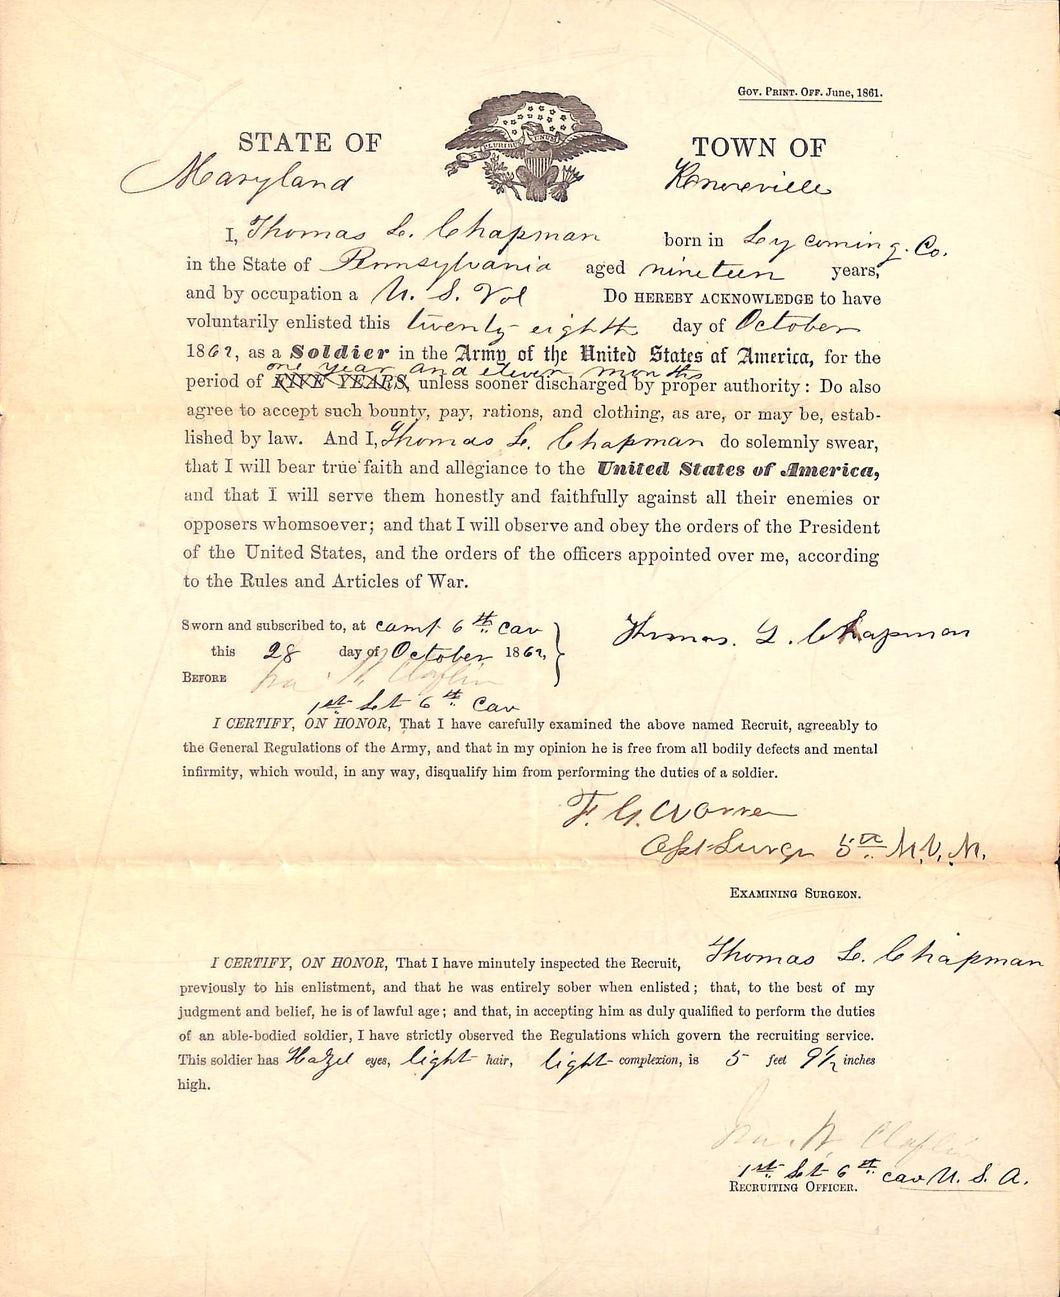 Regular army Enlistment Papers